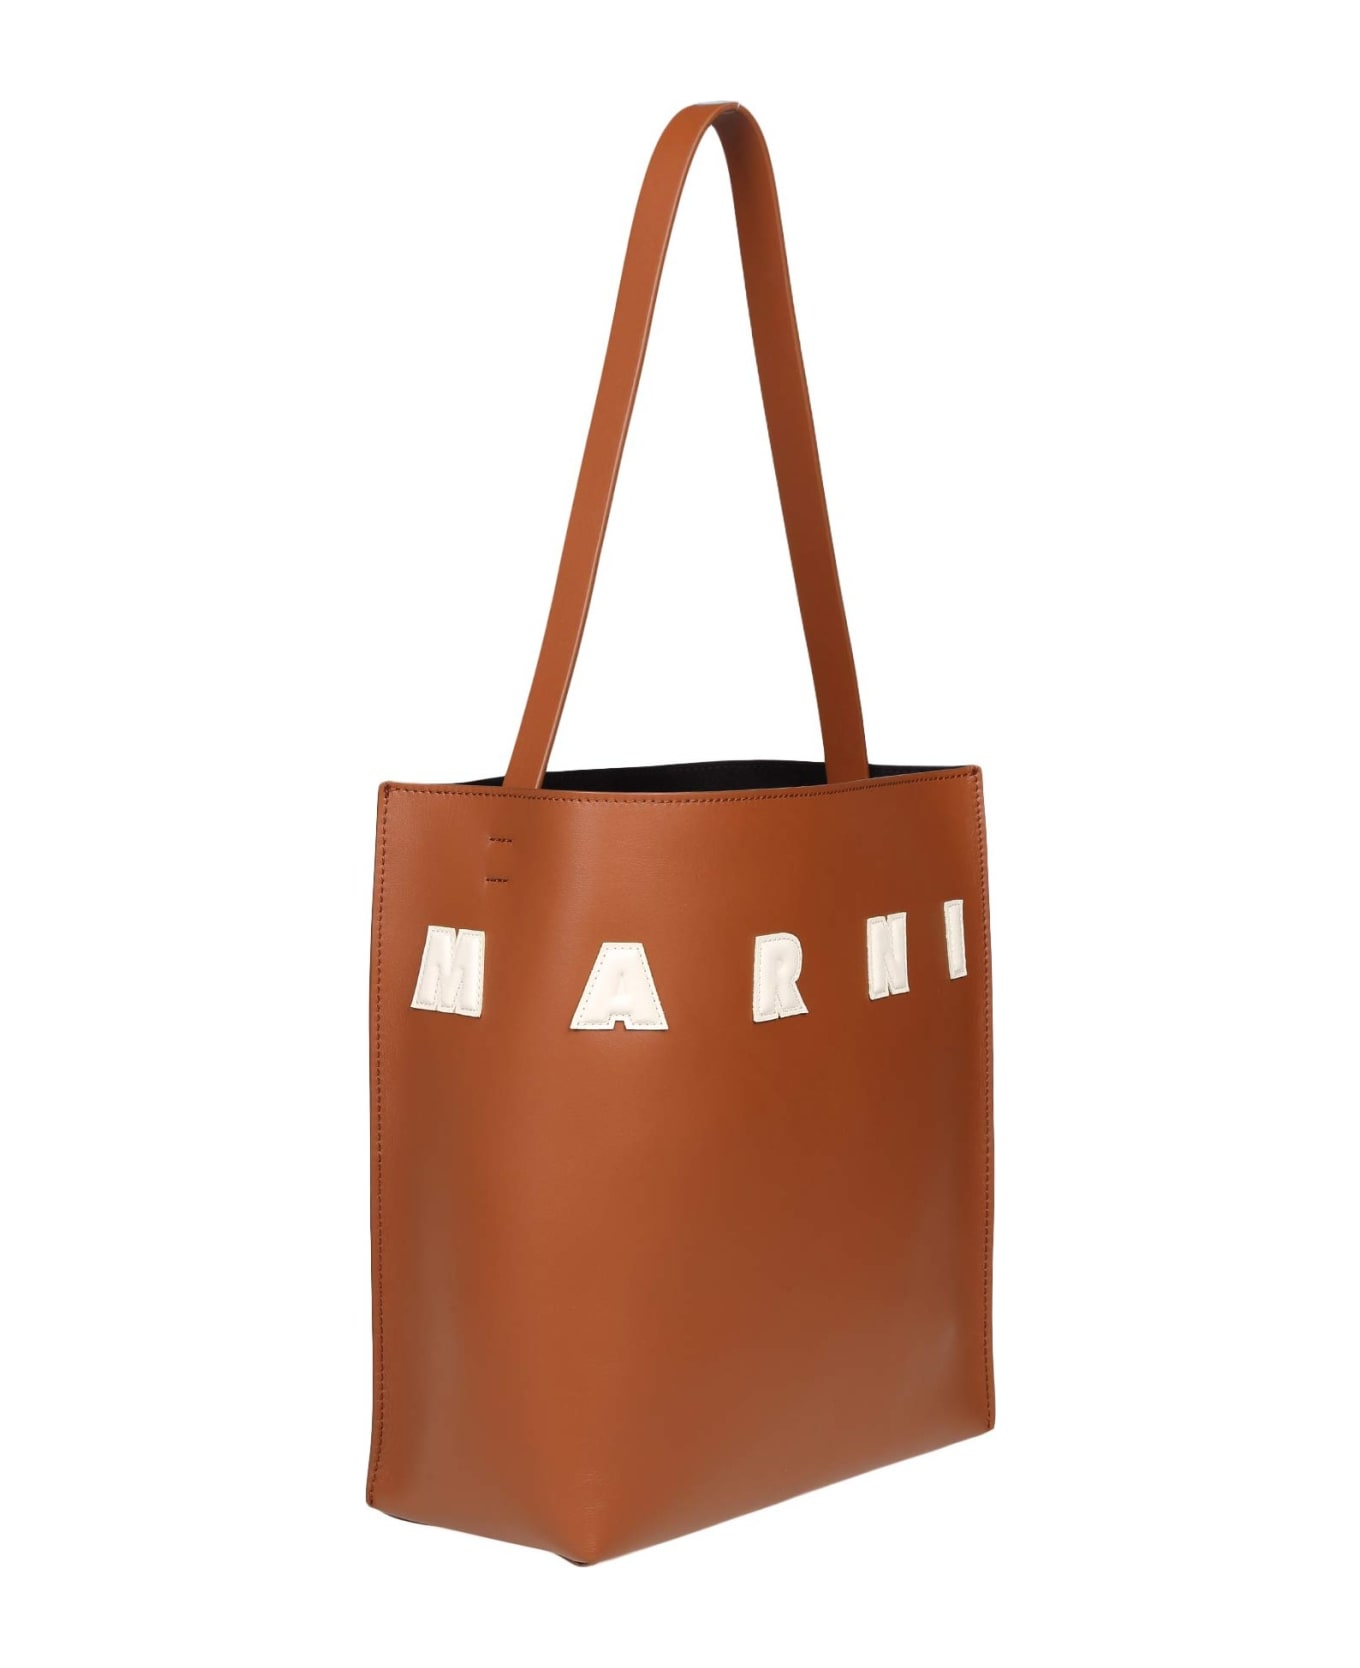 Marni Museo Hobo Bag In Tan Color Leather - Leather